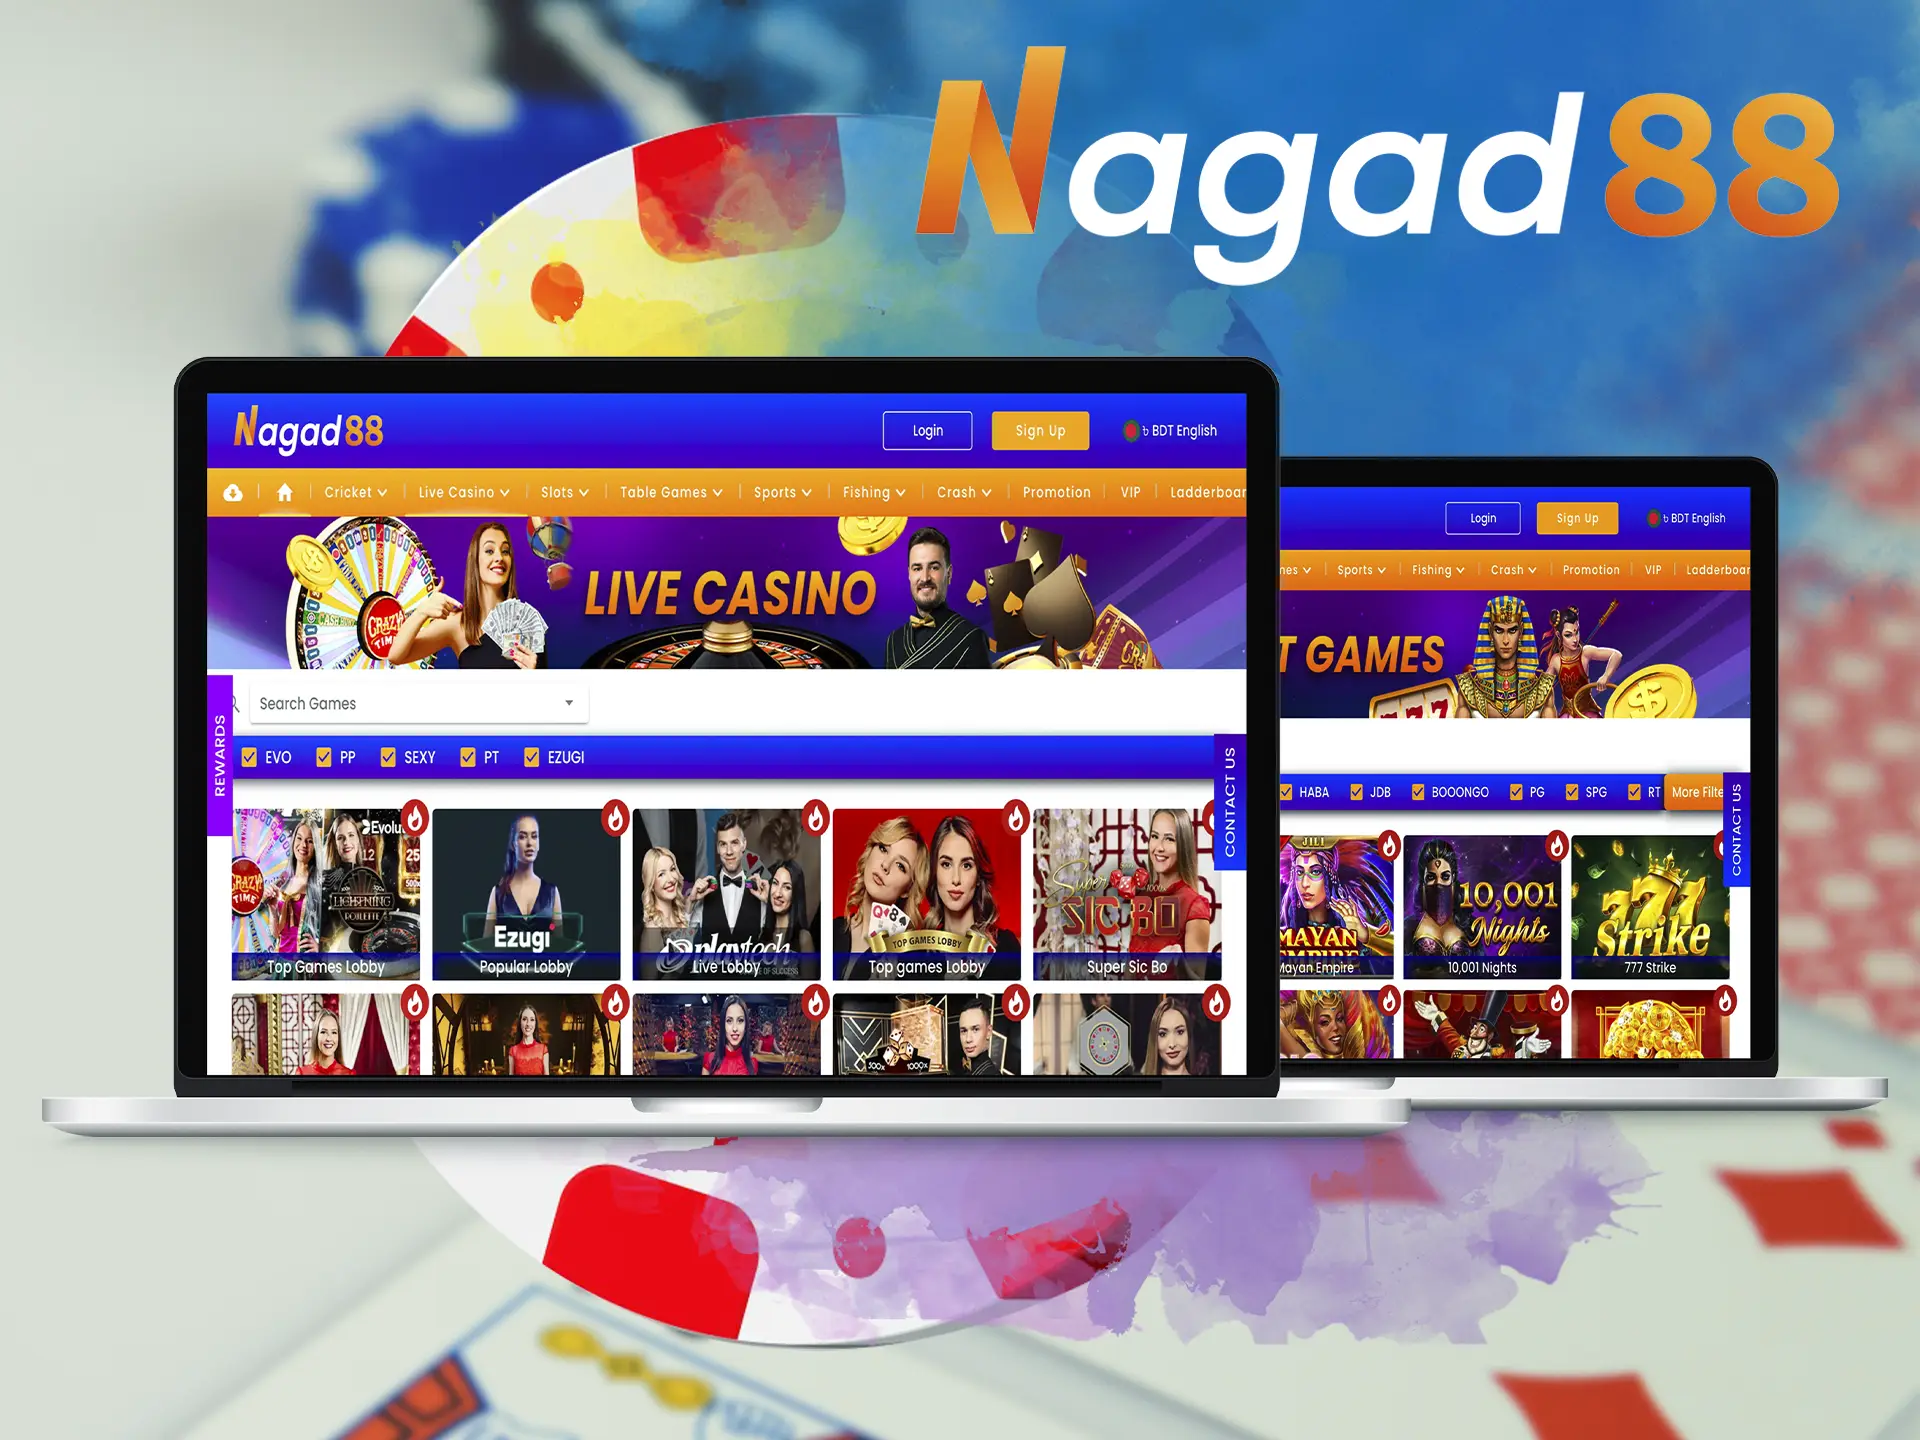 Get the most out of your gaming experience with Nagad88's clever ui-ux design that works for different resolutions.